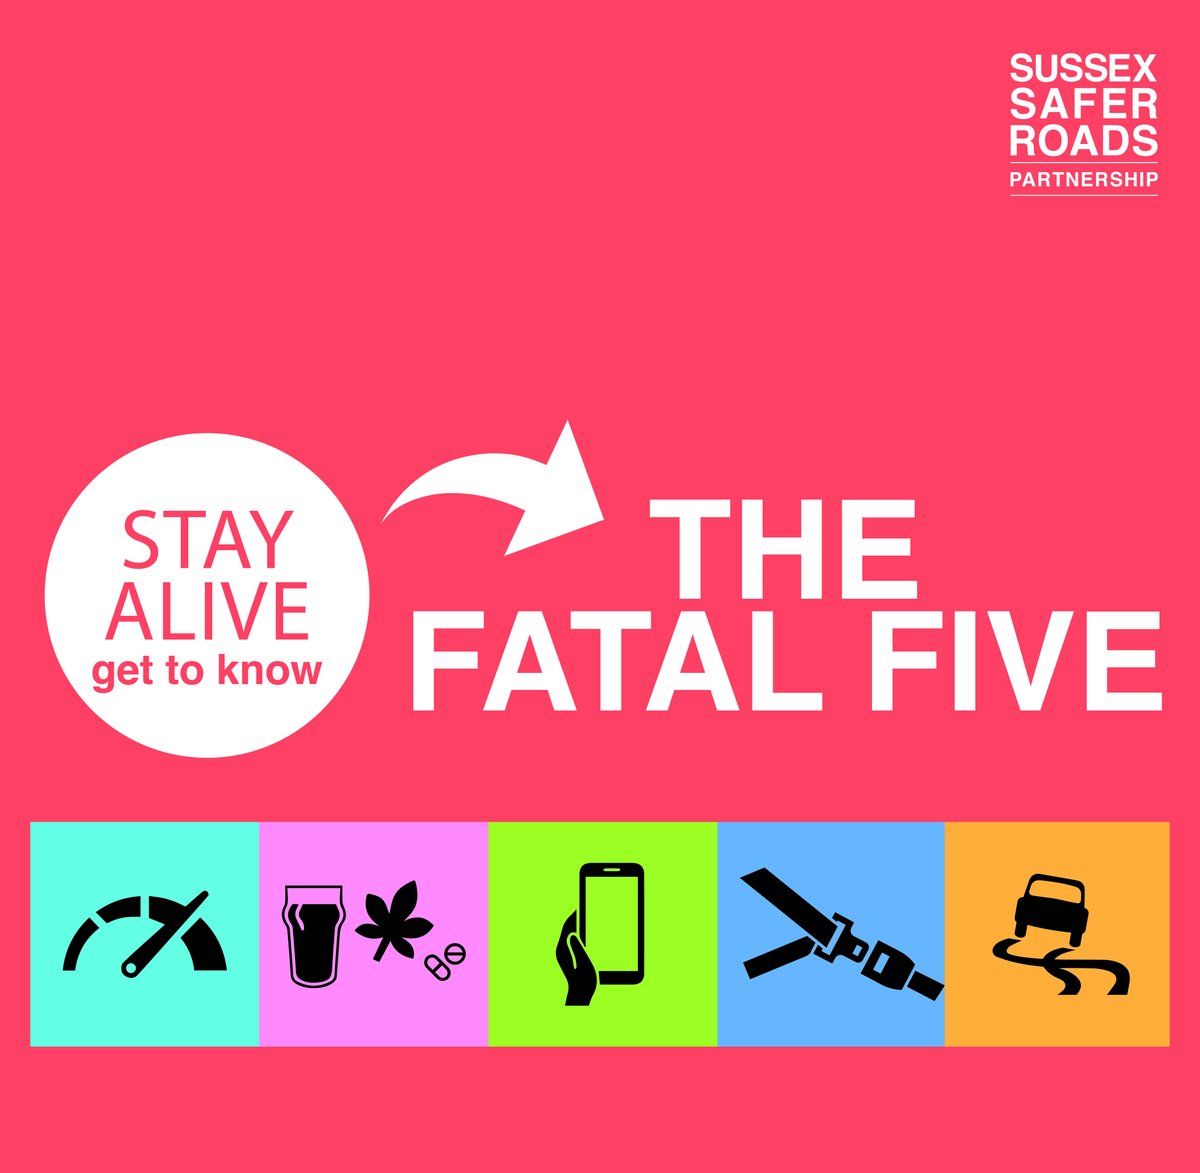 Today is the start of the @PoliceChiefs #Fatal4 Campaign. Here in Sussex we target the #Fatal5! What is the fatal 5? 🏎️Speeding 📵Using a mobile phone 💺No seatbelt 🍻Drink/ drug driving 👀Careless & dangerous driving #SSRP | #SaferRoads | #Sussex